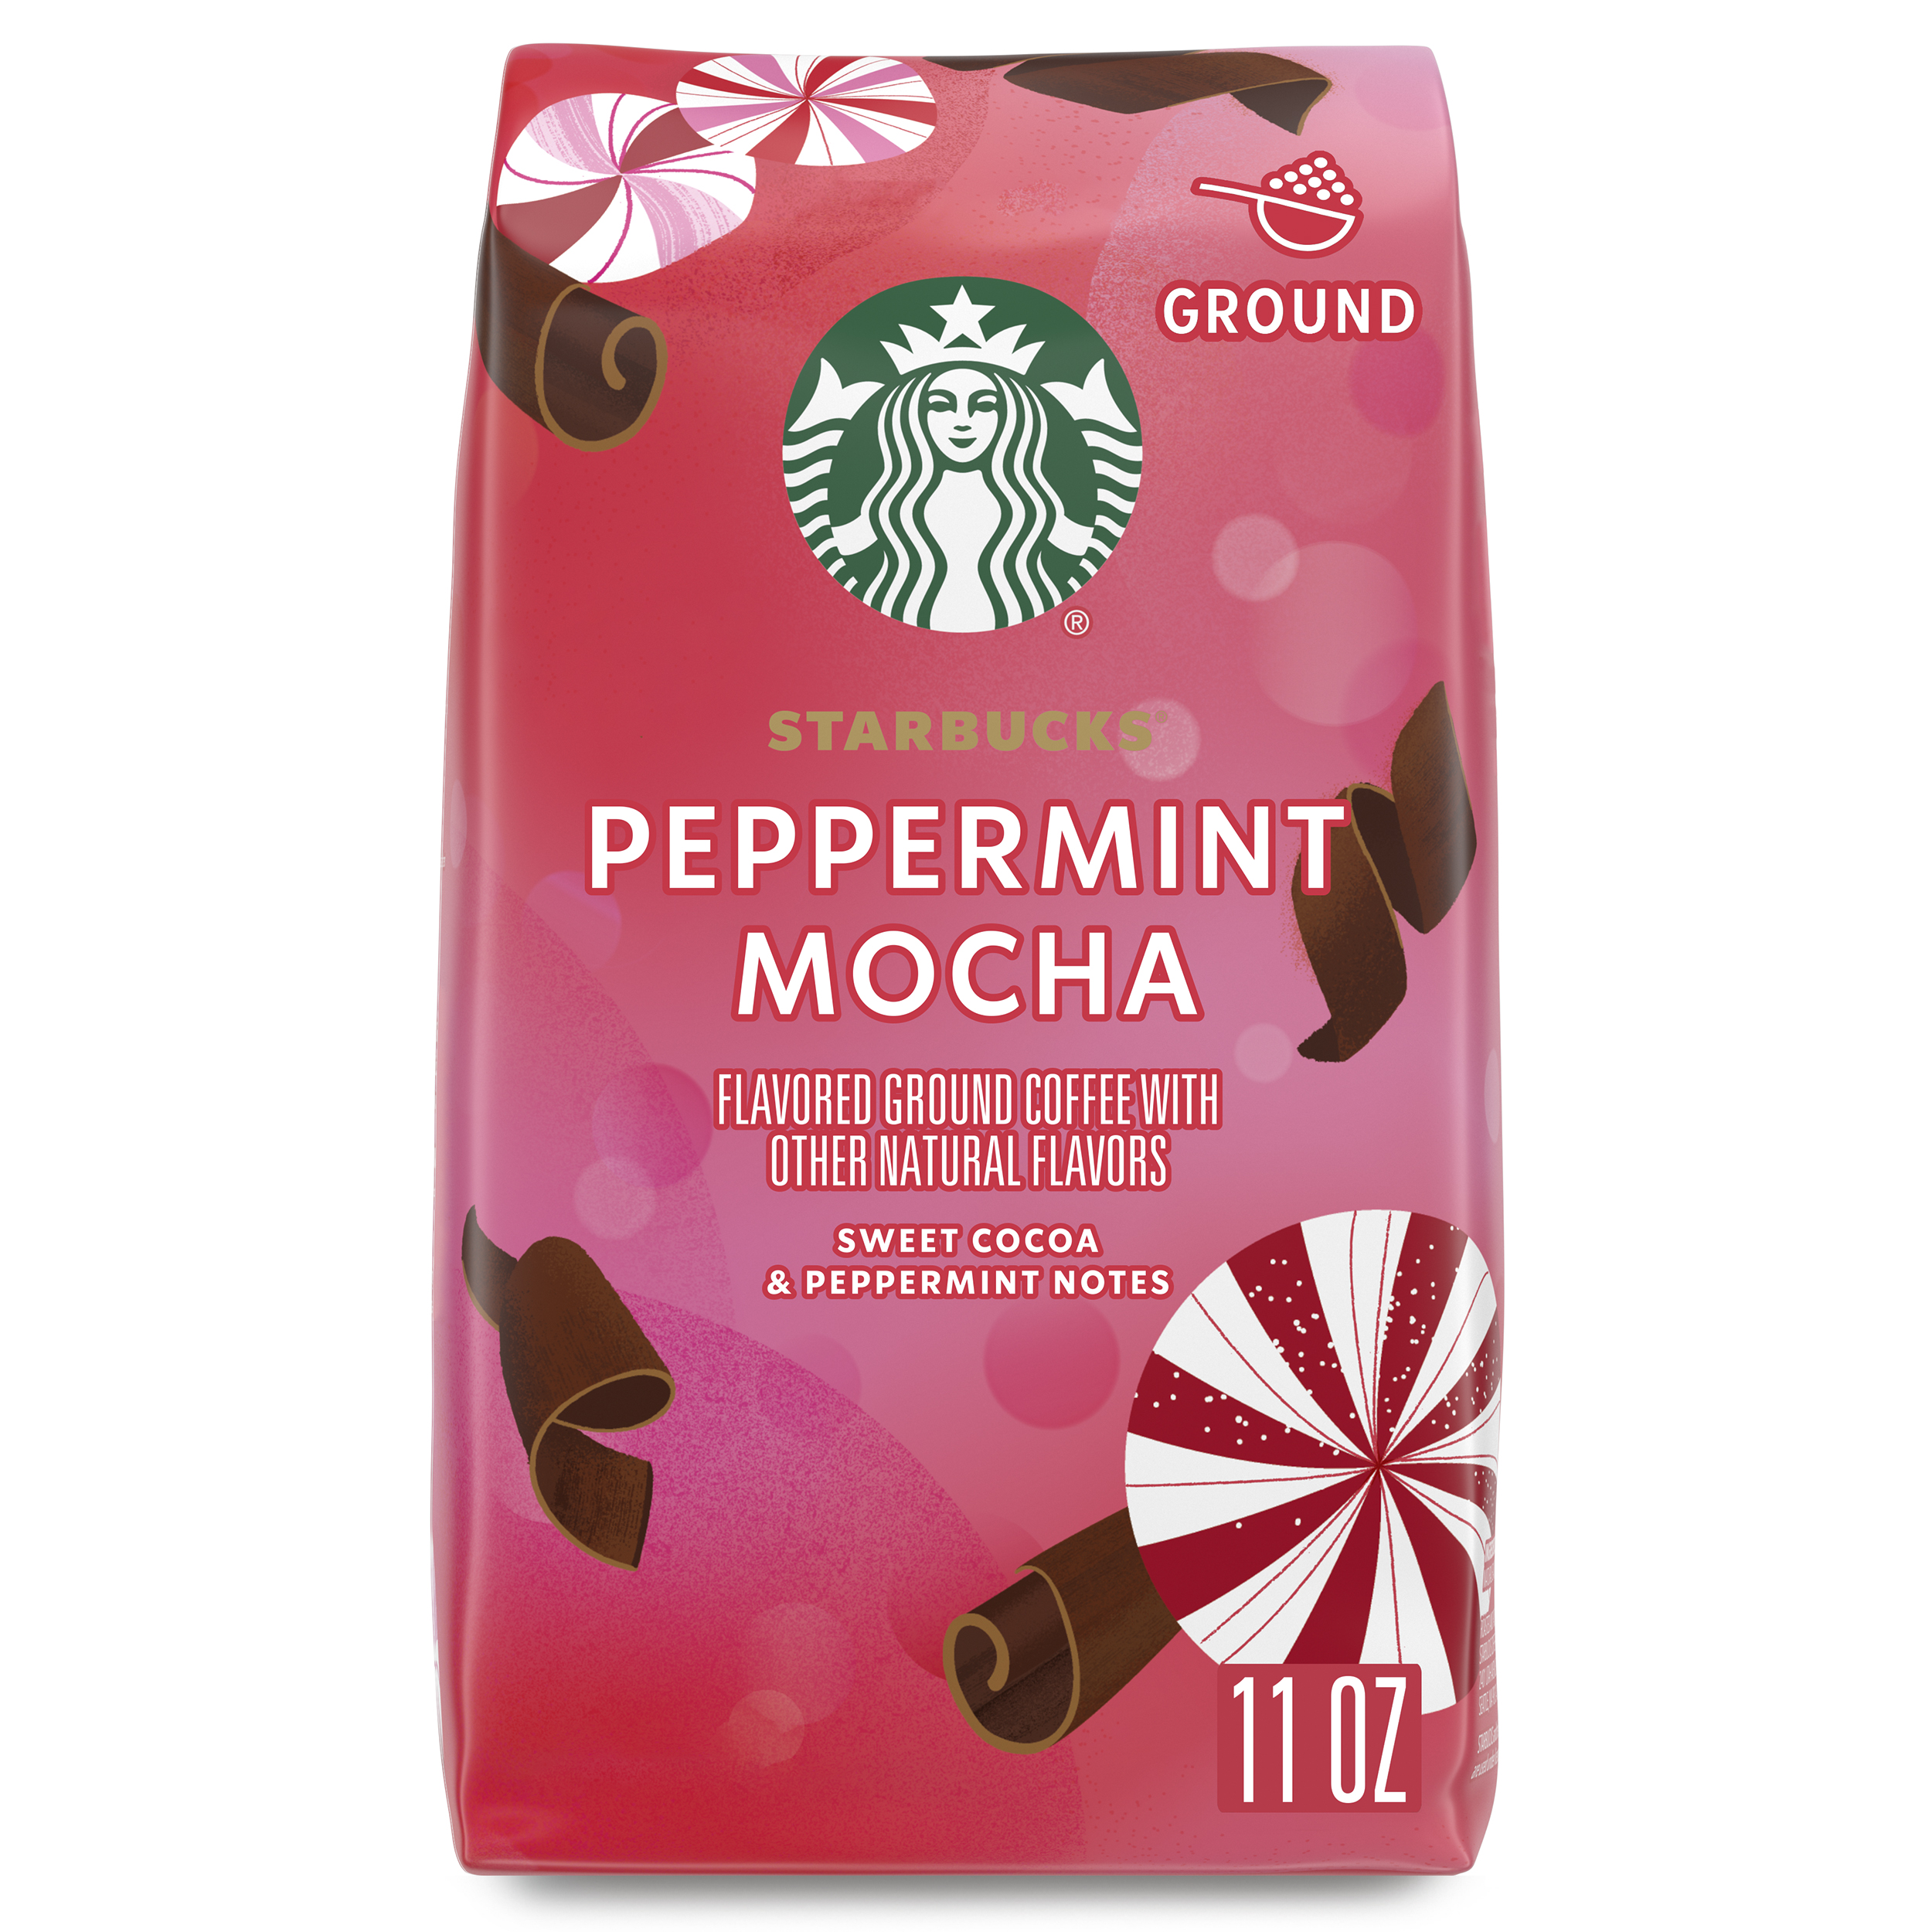 Starbucks Peppermint Mocha Flavored Ground Coffee, 100% Arabica, Naturally Flavored, Limited Edition, 11 oz - image 1 of 7